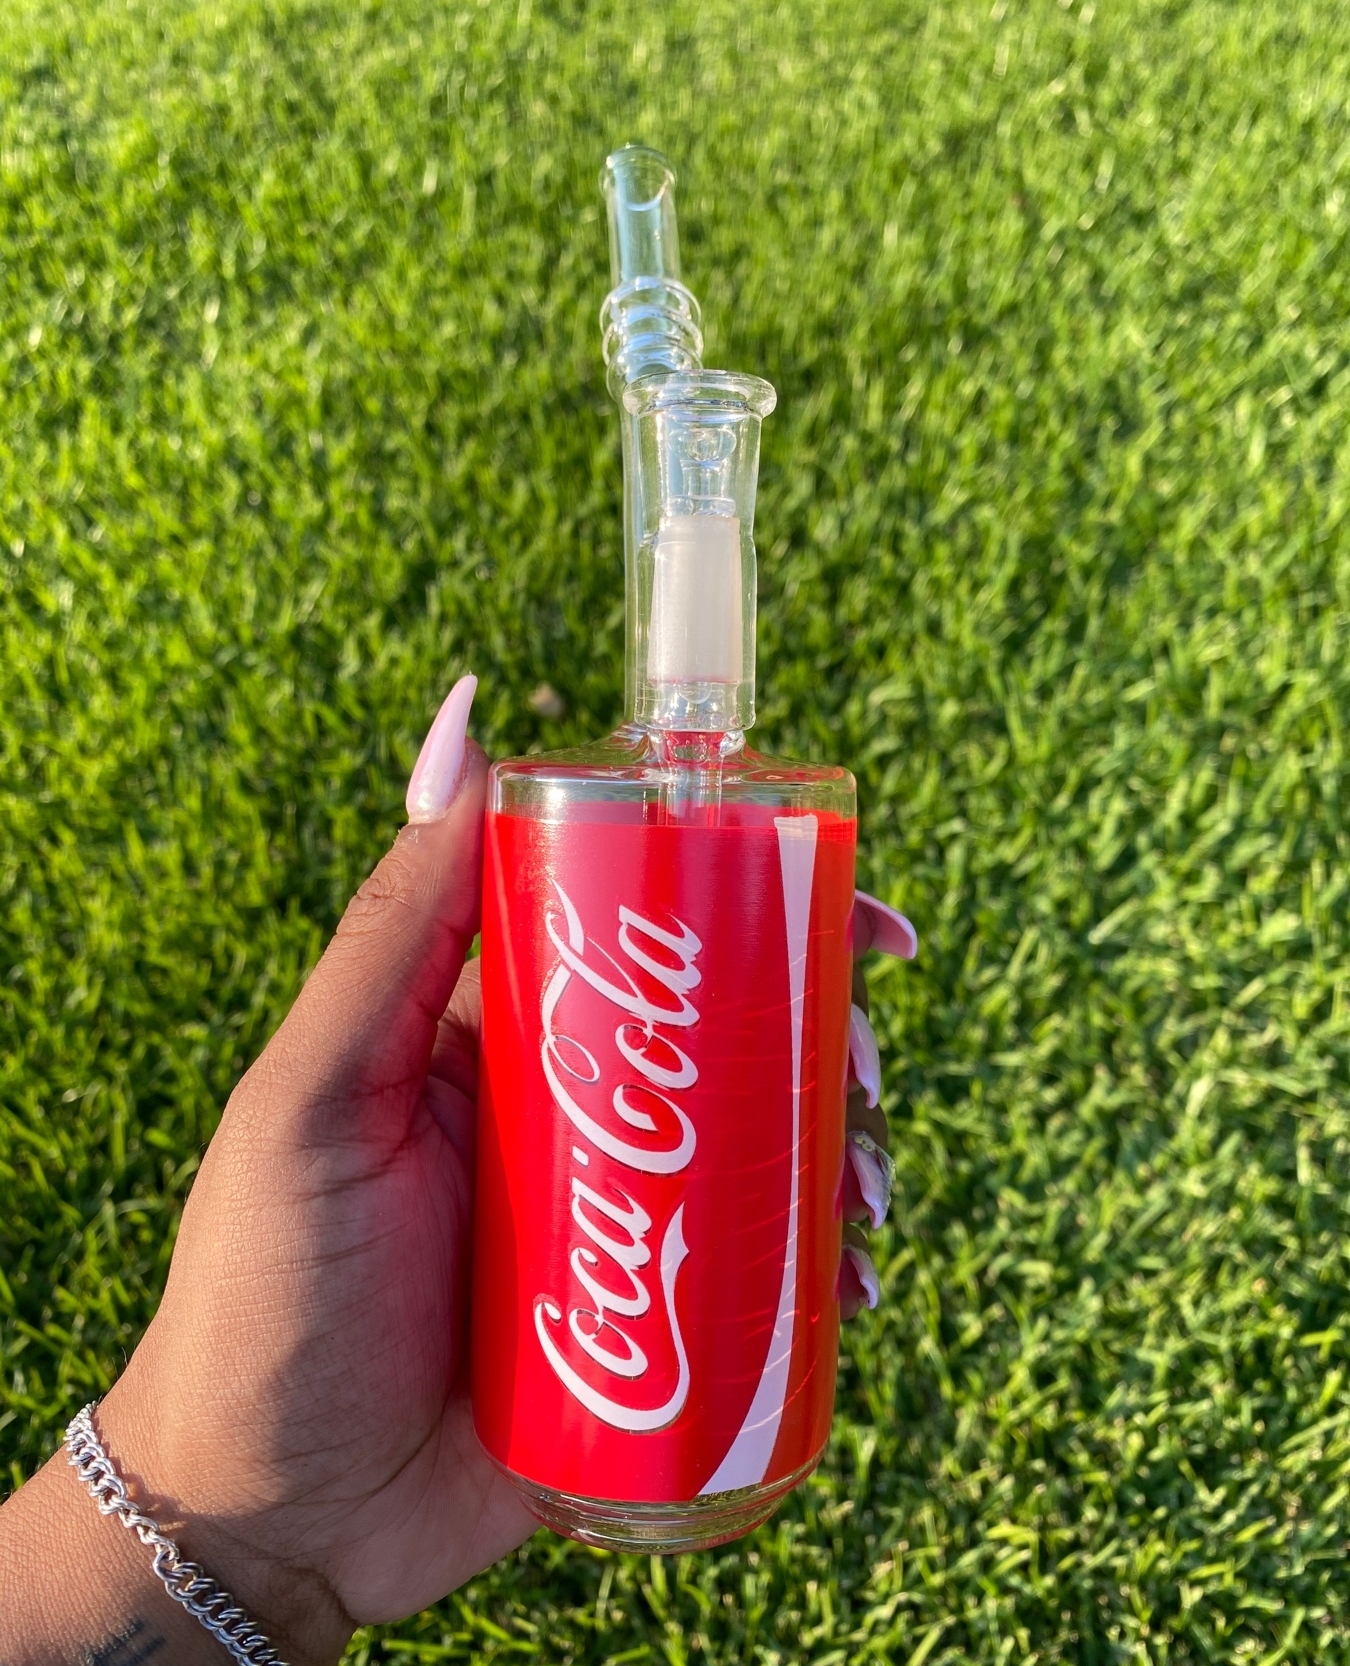 The Stoners Vault on Twitter: "Its the Coke Sprite bongs for me! We still have a few in stock! Search "Bongs" on our site! #Smoke #SmokeSumn #Weed #420 #420Daily #420Everyday #420Community #